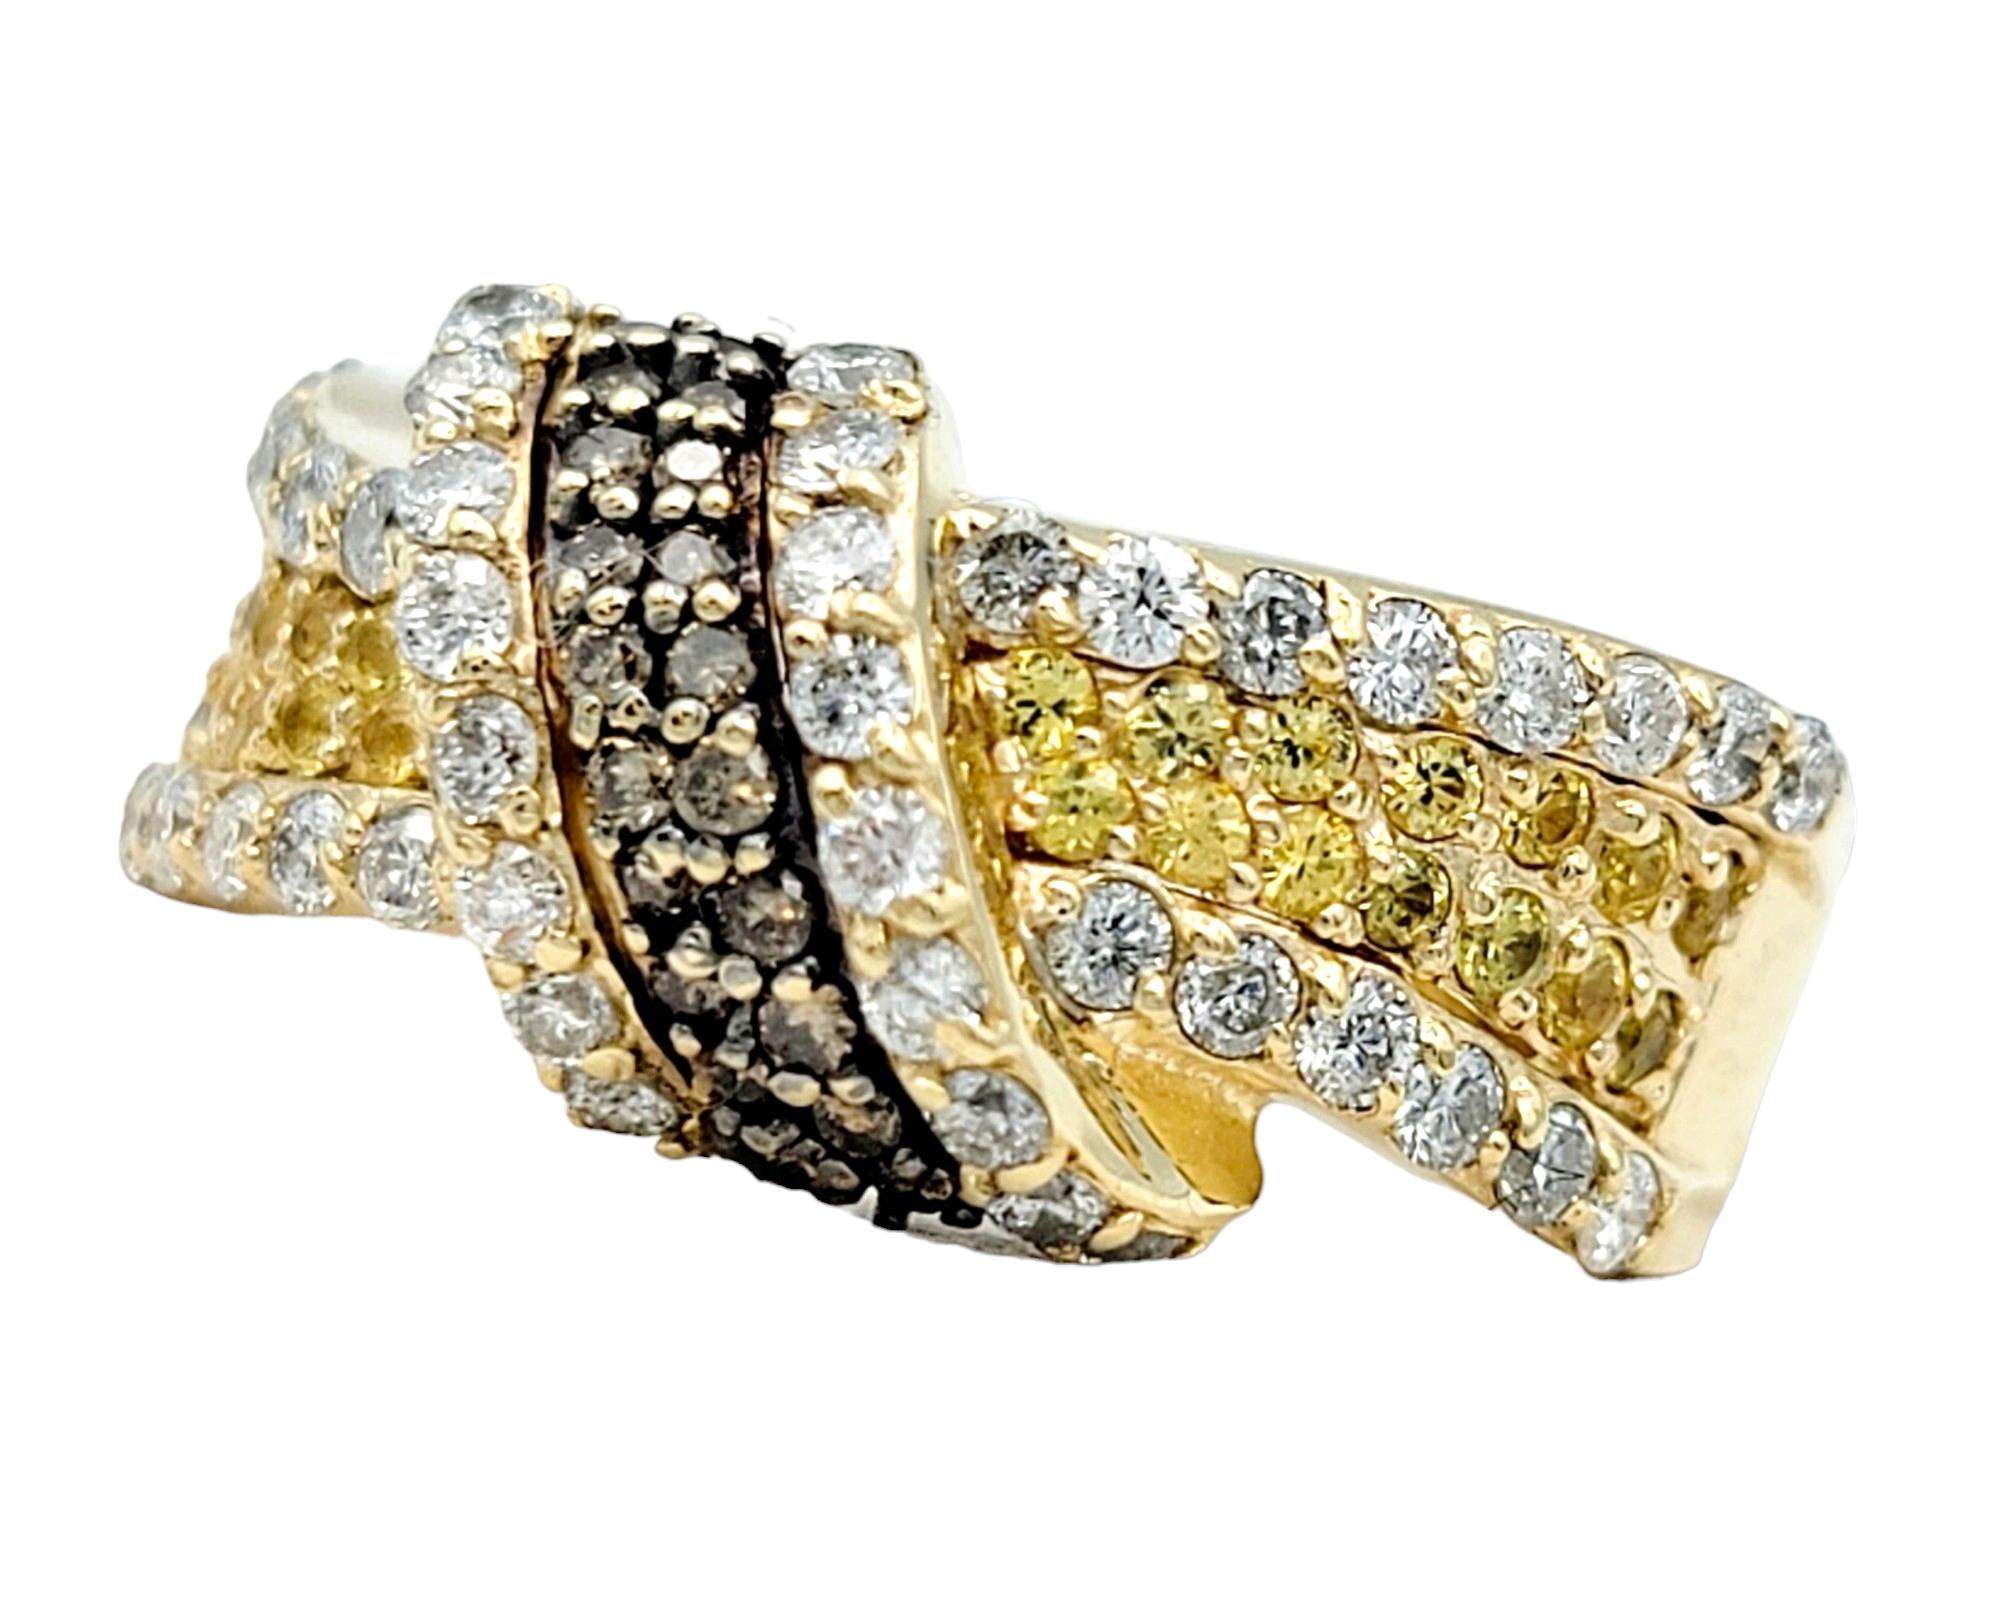 Ring Size: 7

This gorgeous ring boasts a unique blend of sophistication and warmth with its captivating 14 karat yellow gold band ring featuring an exquisite twisted knot design. The intertwining strands create a visual harmony that symbolizes